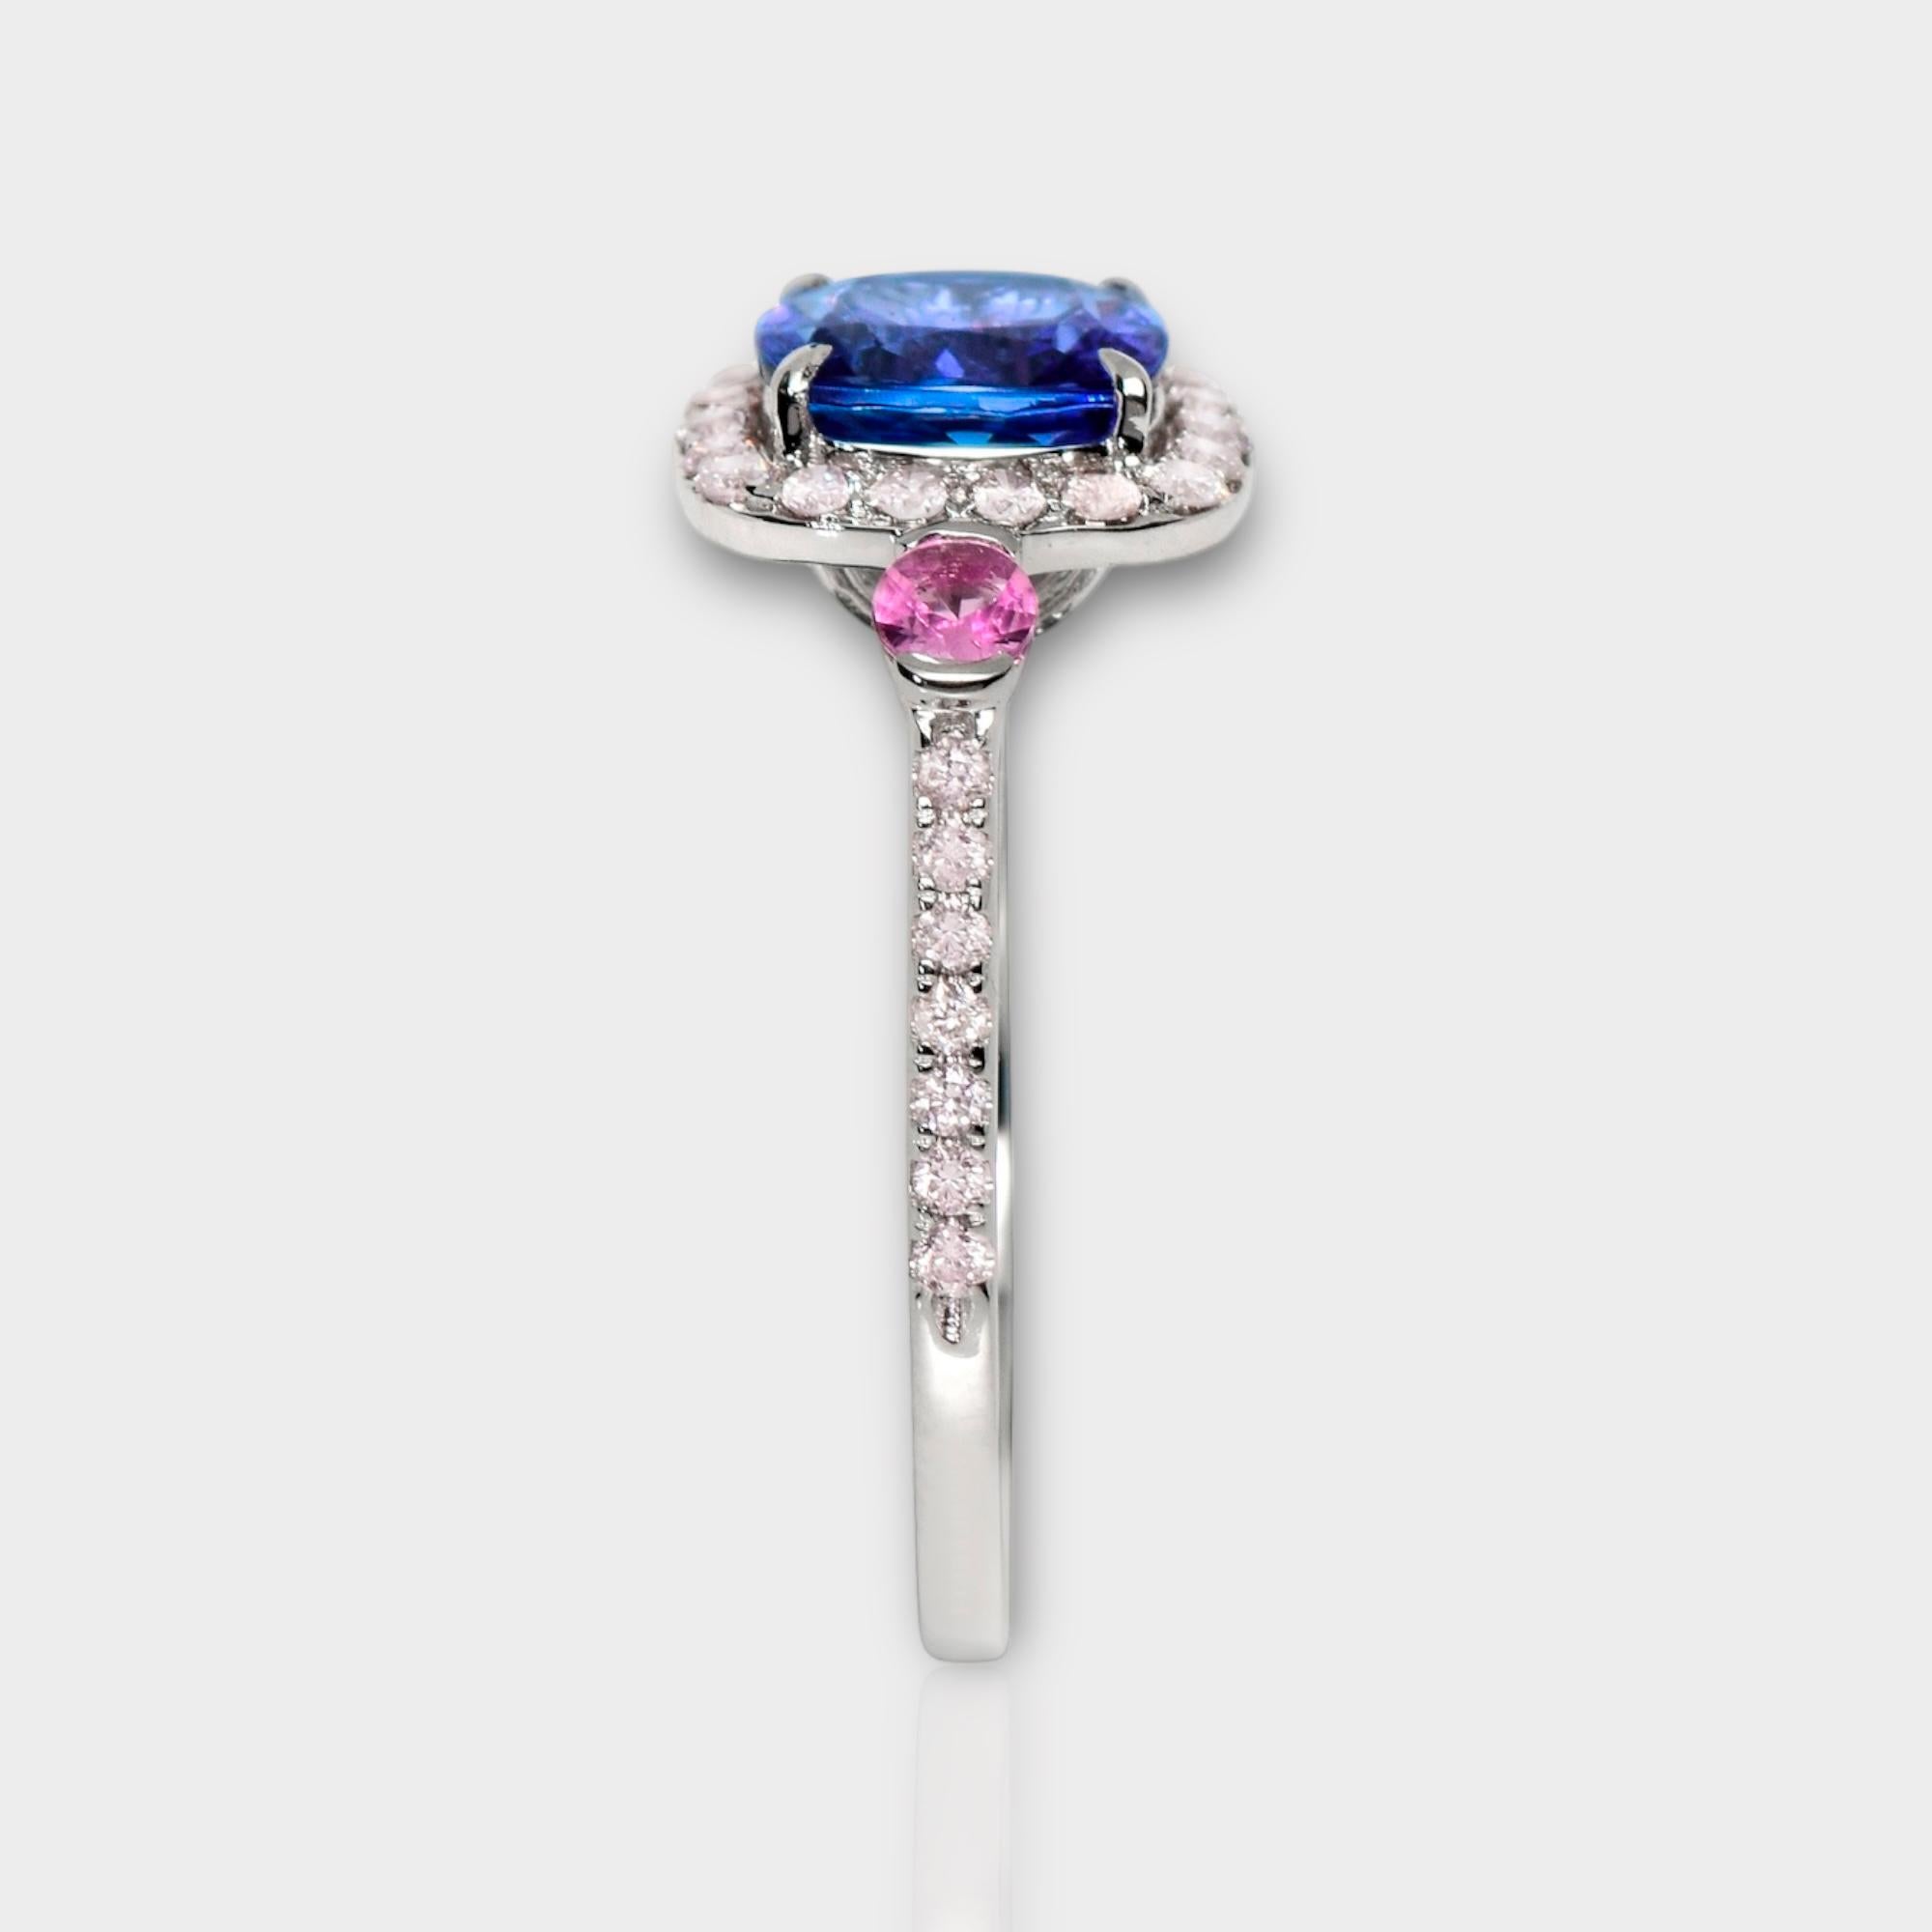 IGI 14K 1.87 ct Tanzanite&Pink Diamond Antique Art Deco Engagement Ring In New Condition For Sale In Kaohsiung City, TW